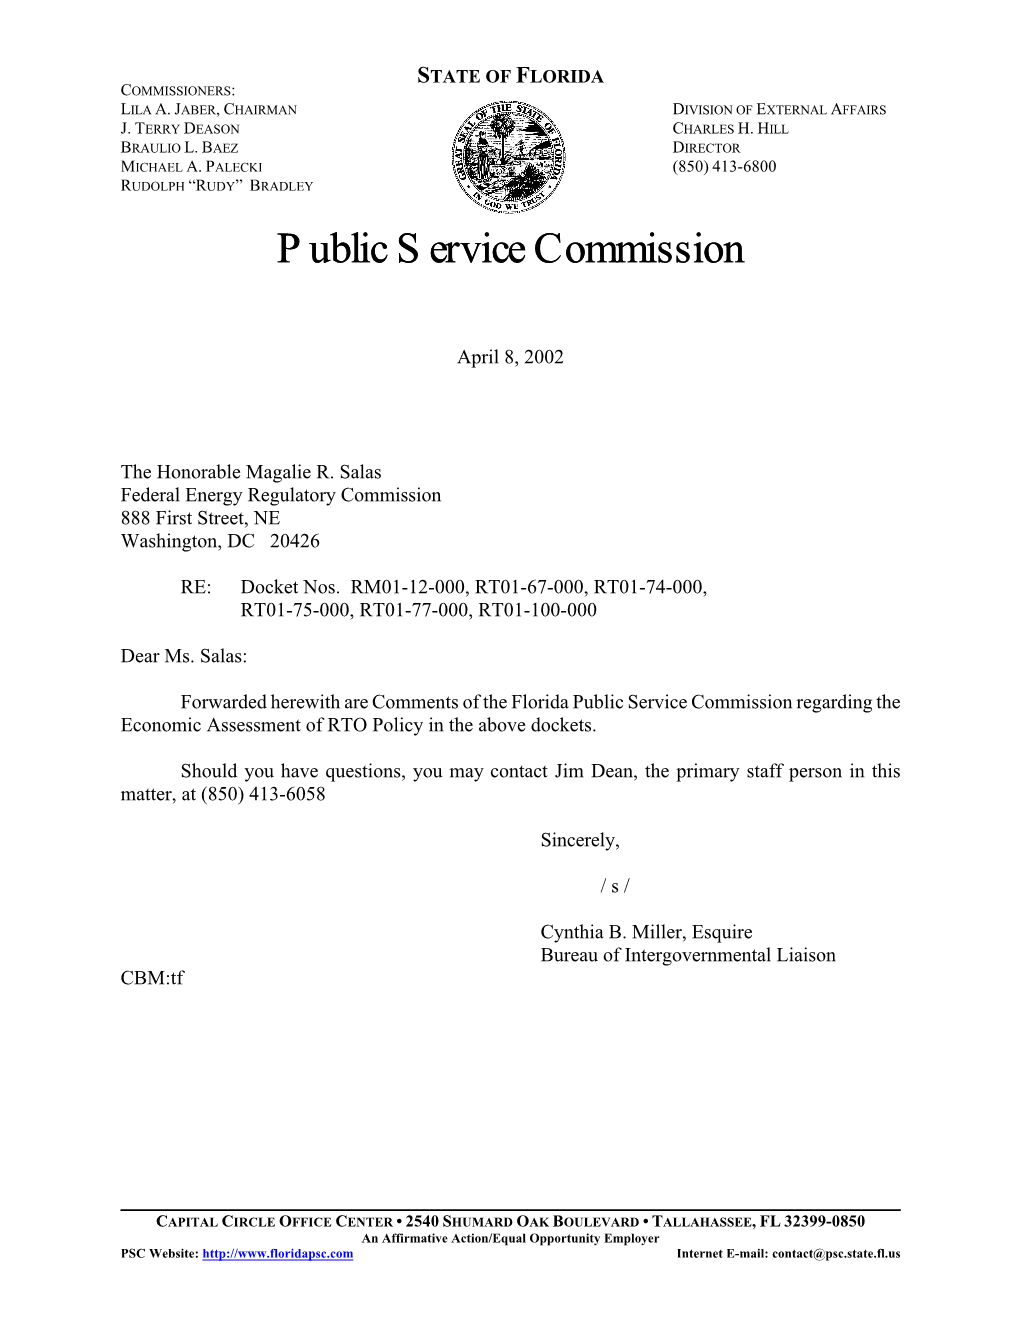 Florida Public Service Commission Regarding the Economic Assessment of RTO Policy in the Above Dockets